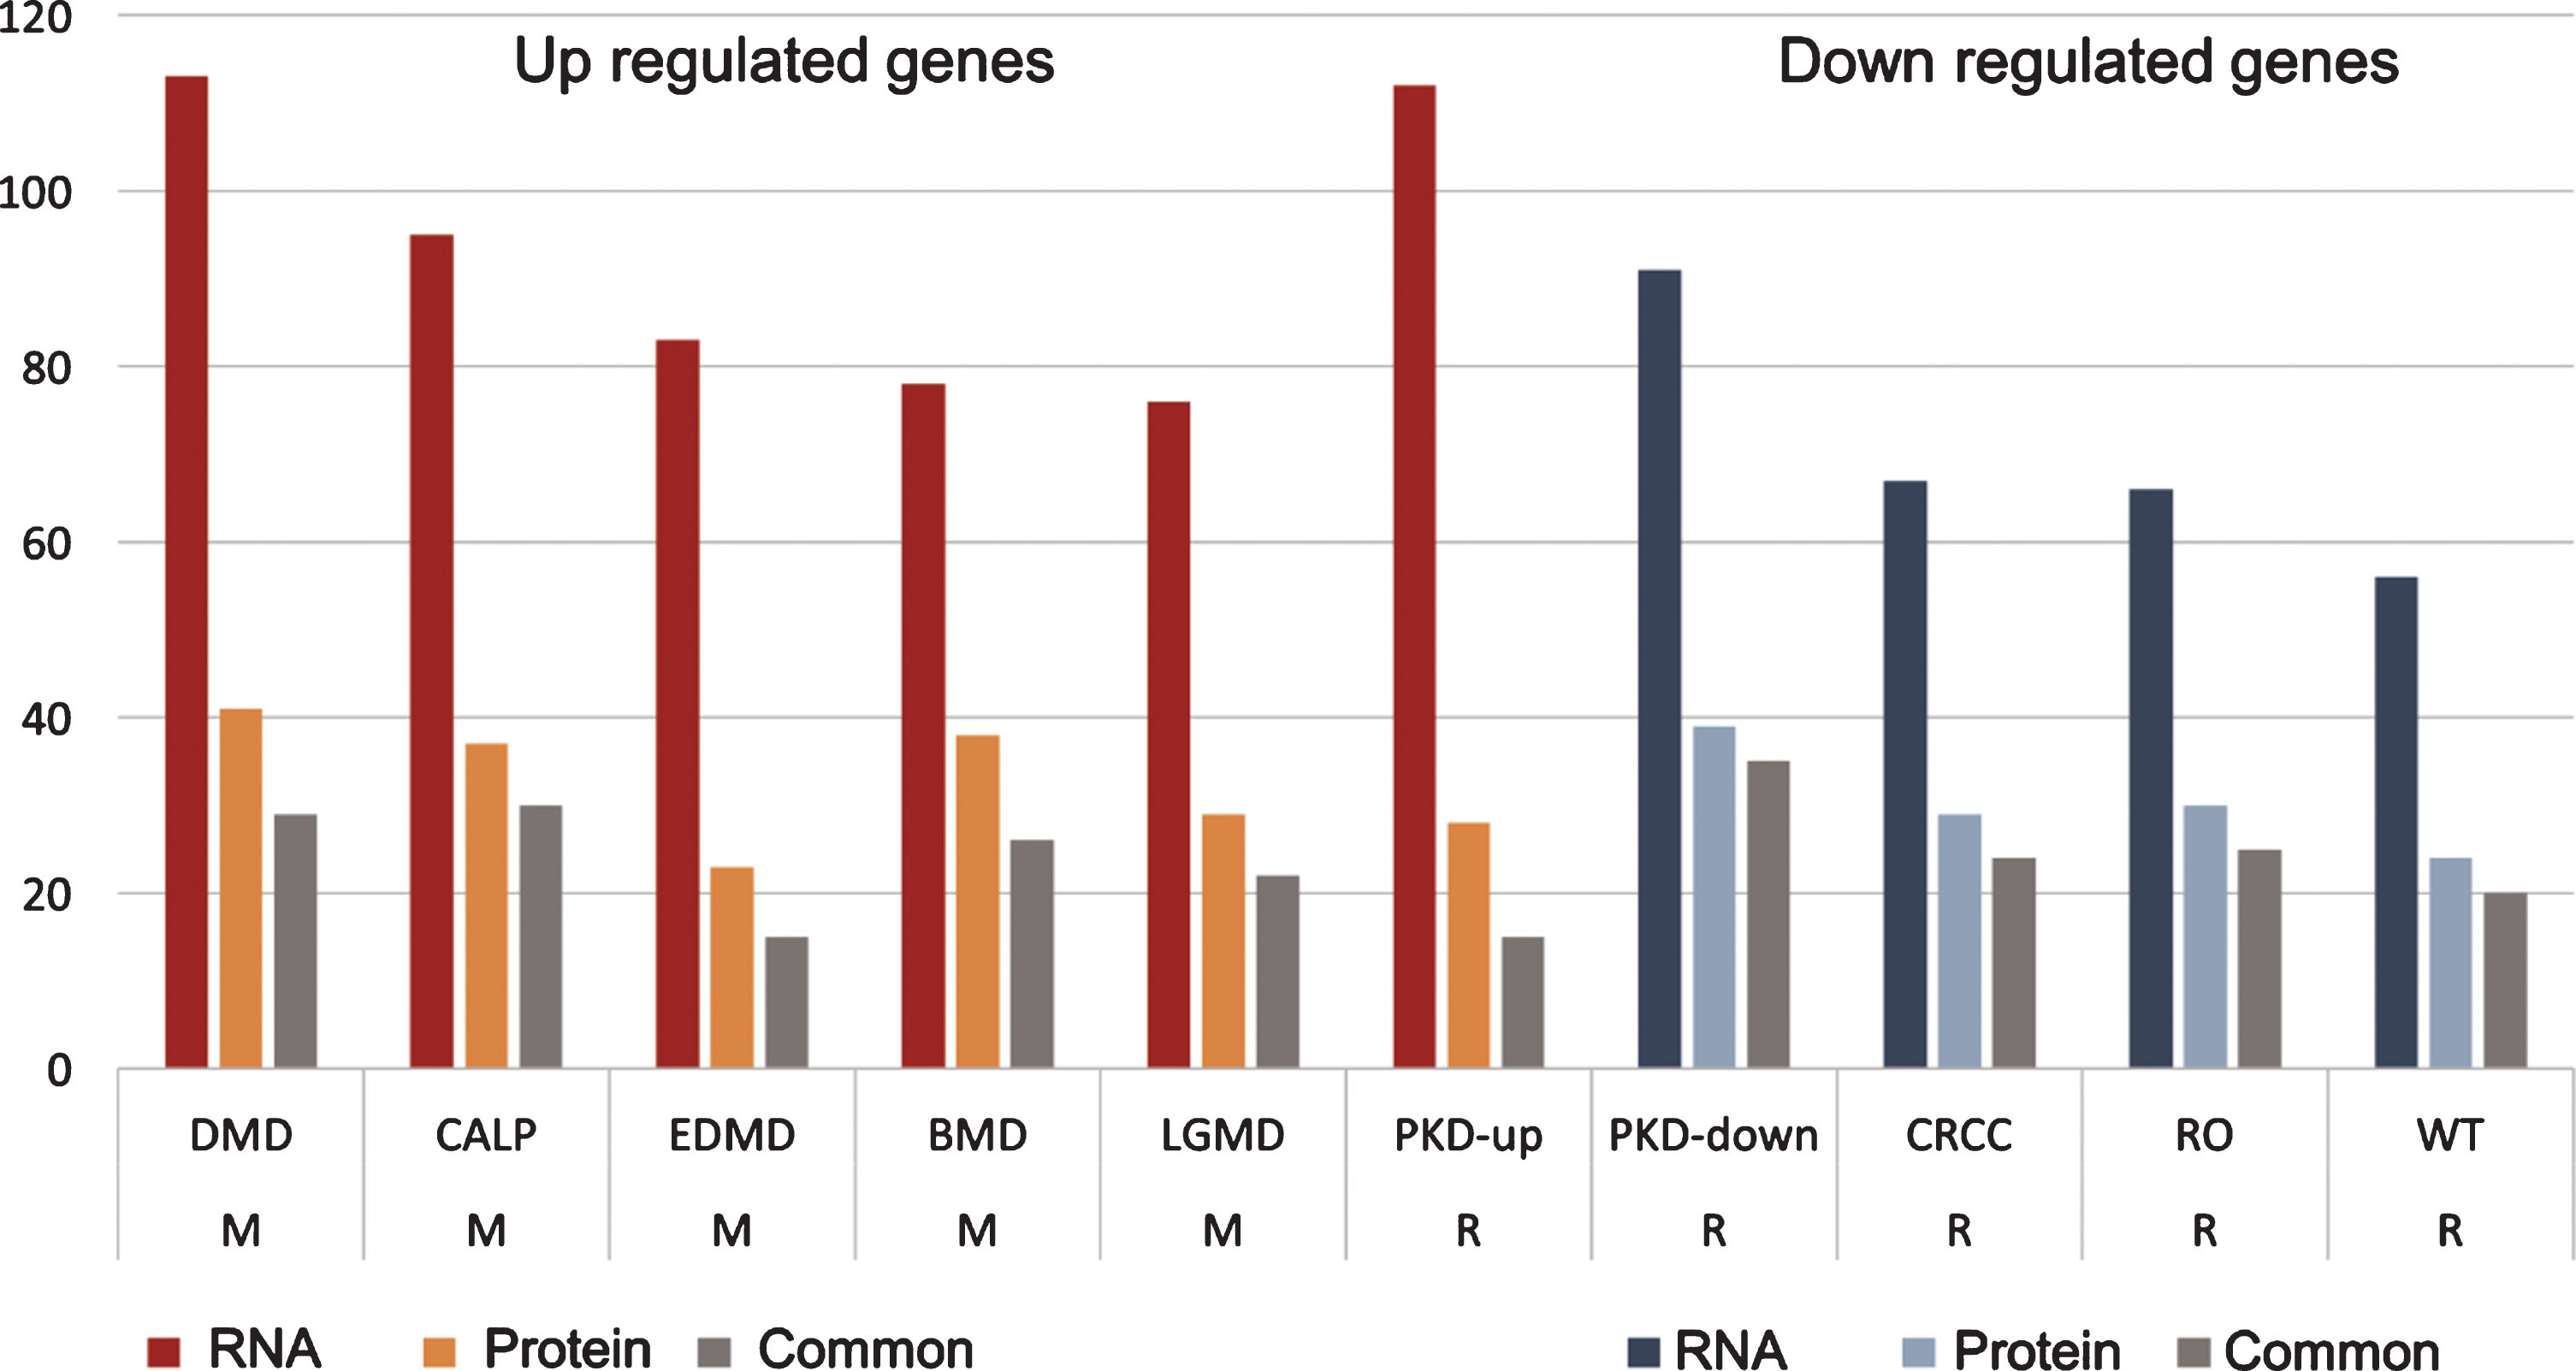 Human muscular and renal diseases share dysregulated gene sets with the sick kidney of GneM743T/M743T mice. DEG from sick kidney, both from RNA and protein, displayed enrichments in genes that are differentially expressed in muscular and renal diseases. Up regulated genes in sick kidney were enriched with genes that are up-regulated in PKD and muscular diseases; down regulated genes in sick kidney are enriched with genes that are down-regulated in renal diseases. The values in “RNA” and “Protein” columns are the number of genes with the specific enrichment in either RNA or protein, “common” are the shared genes that are up or down regulated in both RNA and protein. M: muscular; R: renal. DMD: Duchenne muscular dystrophy; CALP: calpainopathy; EDMD: Emery-Dreifus muscular dystrophy; BMD: Becker muscular dystrophy; LGMD: limb-girdle muscular dystrophy; PKD: polycystic kidney disease; CRCC: chromophobe renal cell carcinoma; RO: renal oncocytoma; WT: Wilms tumor.